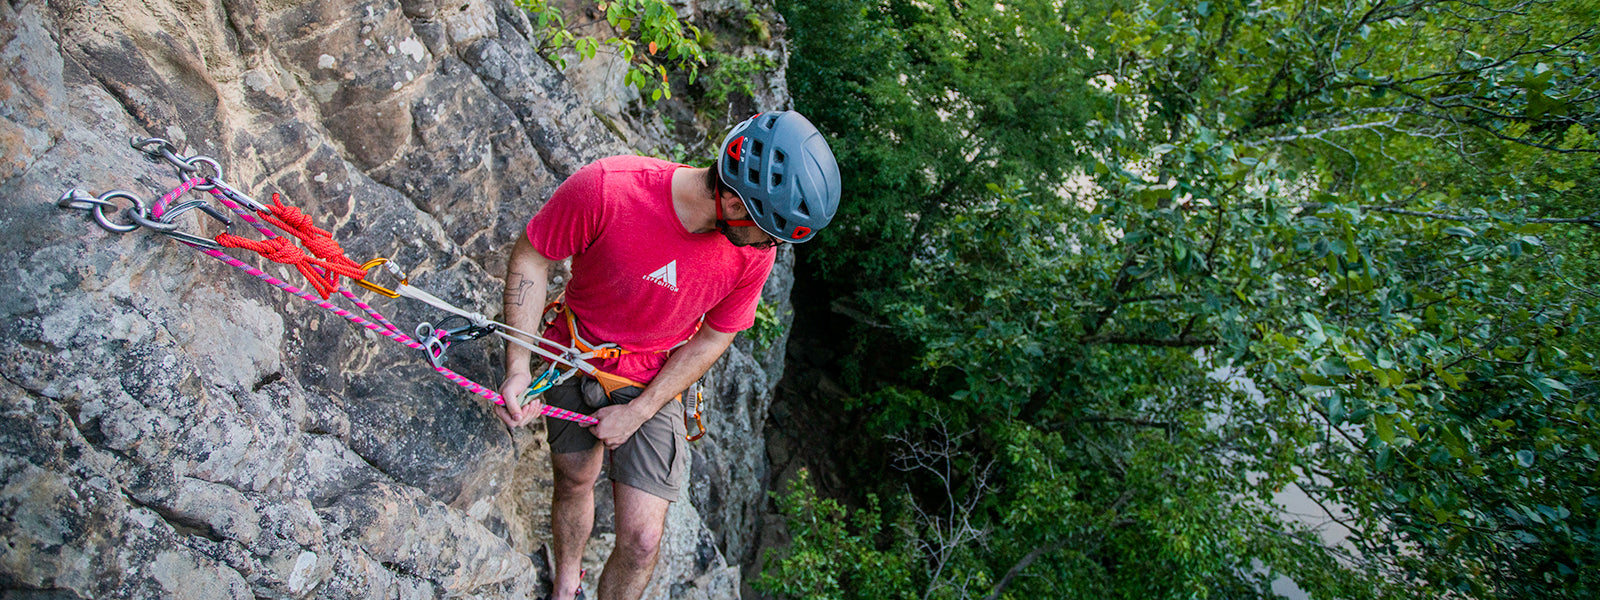 A man wearing a red shirt and climbing helmet looks at the ground from the top of a climbing route. He is about to rappel down the cliff.